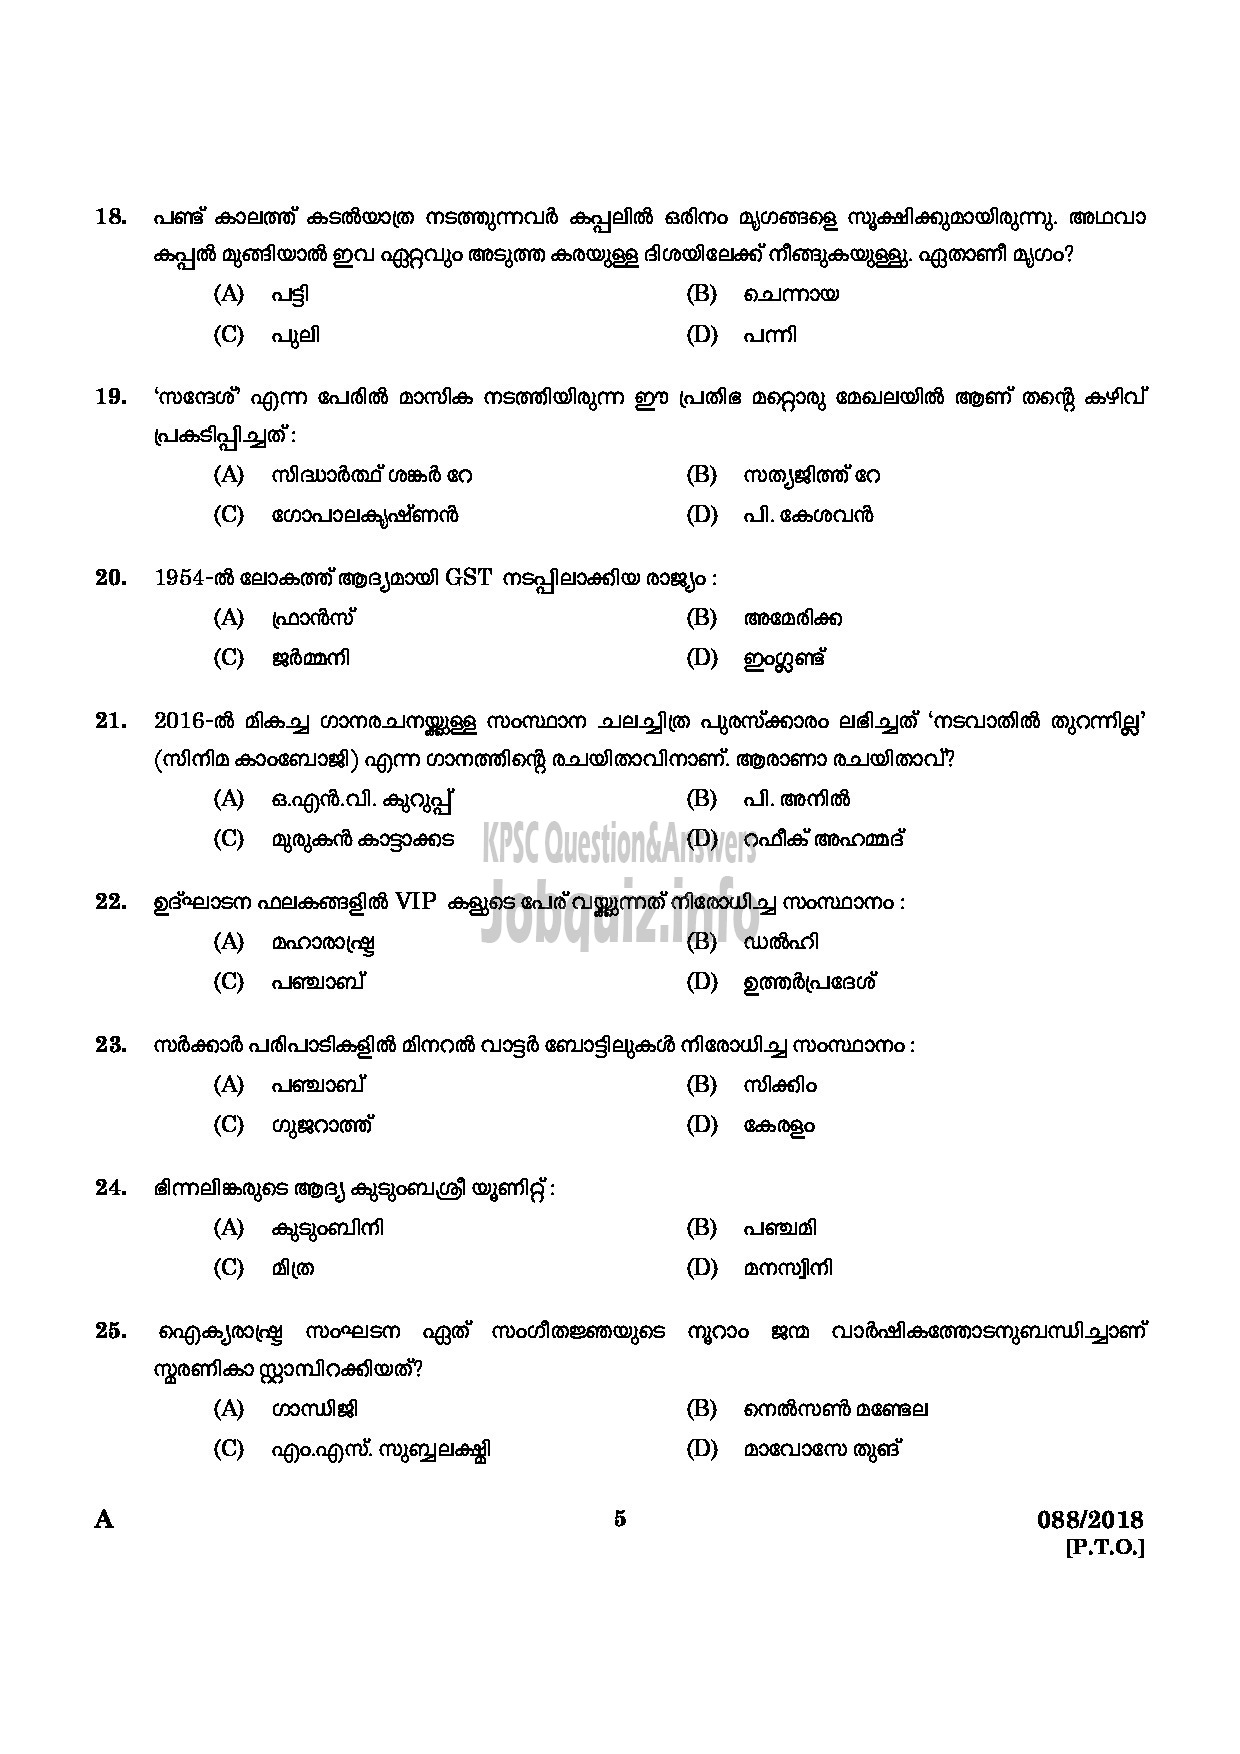 Kerala PSC Question Paper - REPORTER GR II MALAYALAM HEAD CONSTABLE GENERAL EXECUTIVE FORCE POLICE Malayalam-3